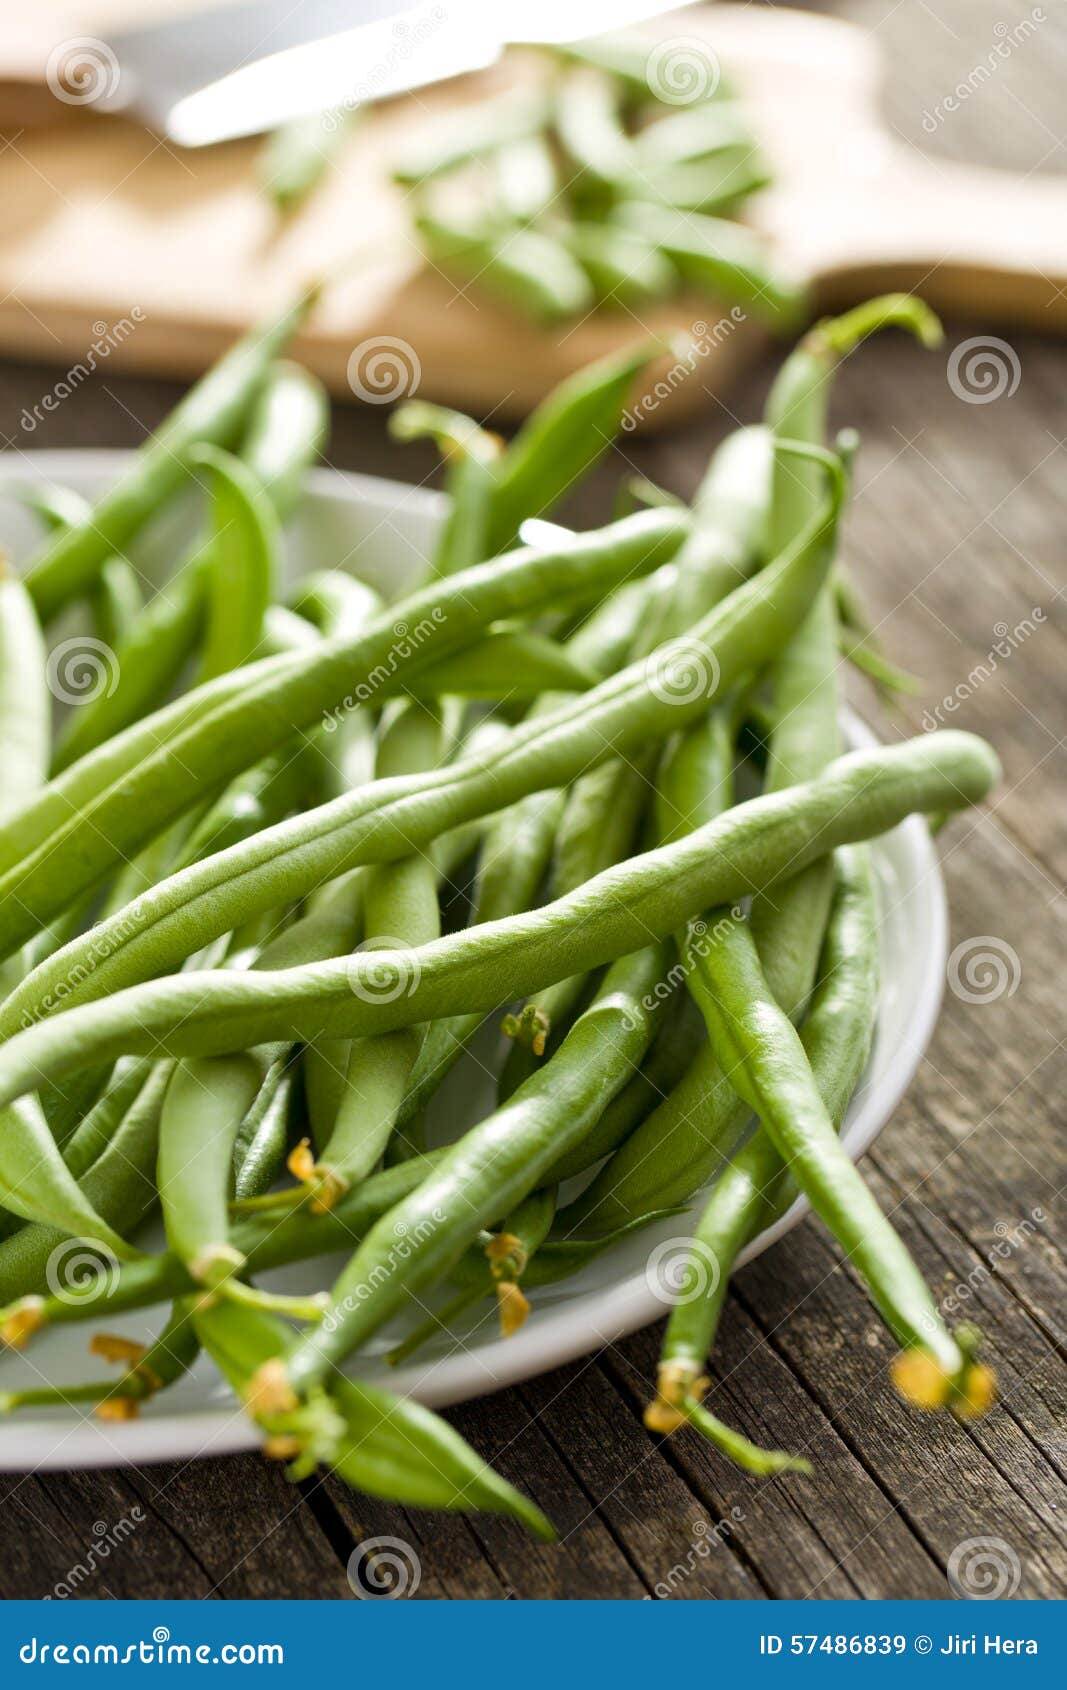 Green beans on old table stock image. Image of gourmet - 57486839